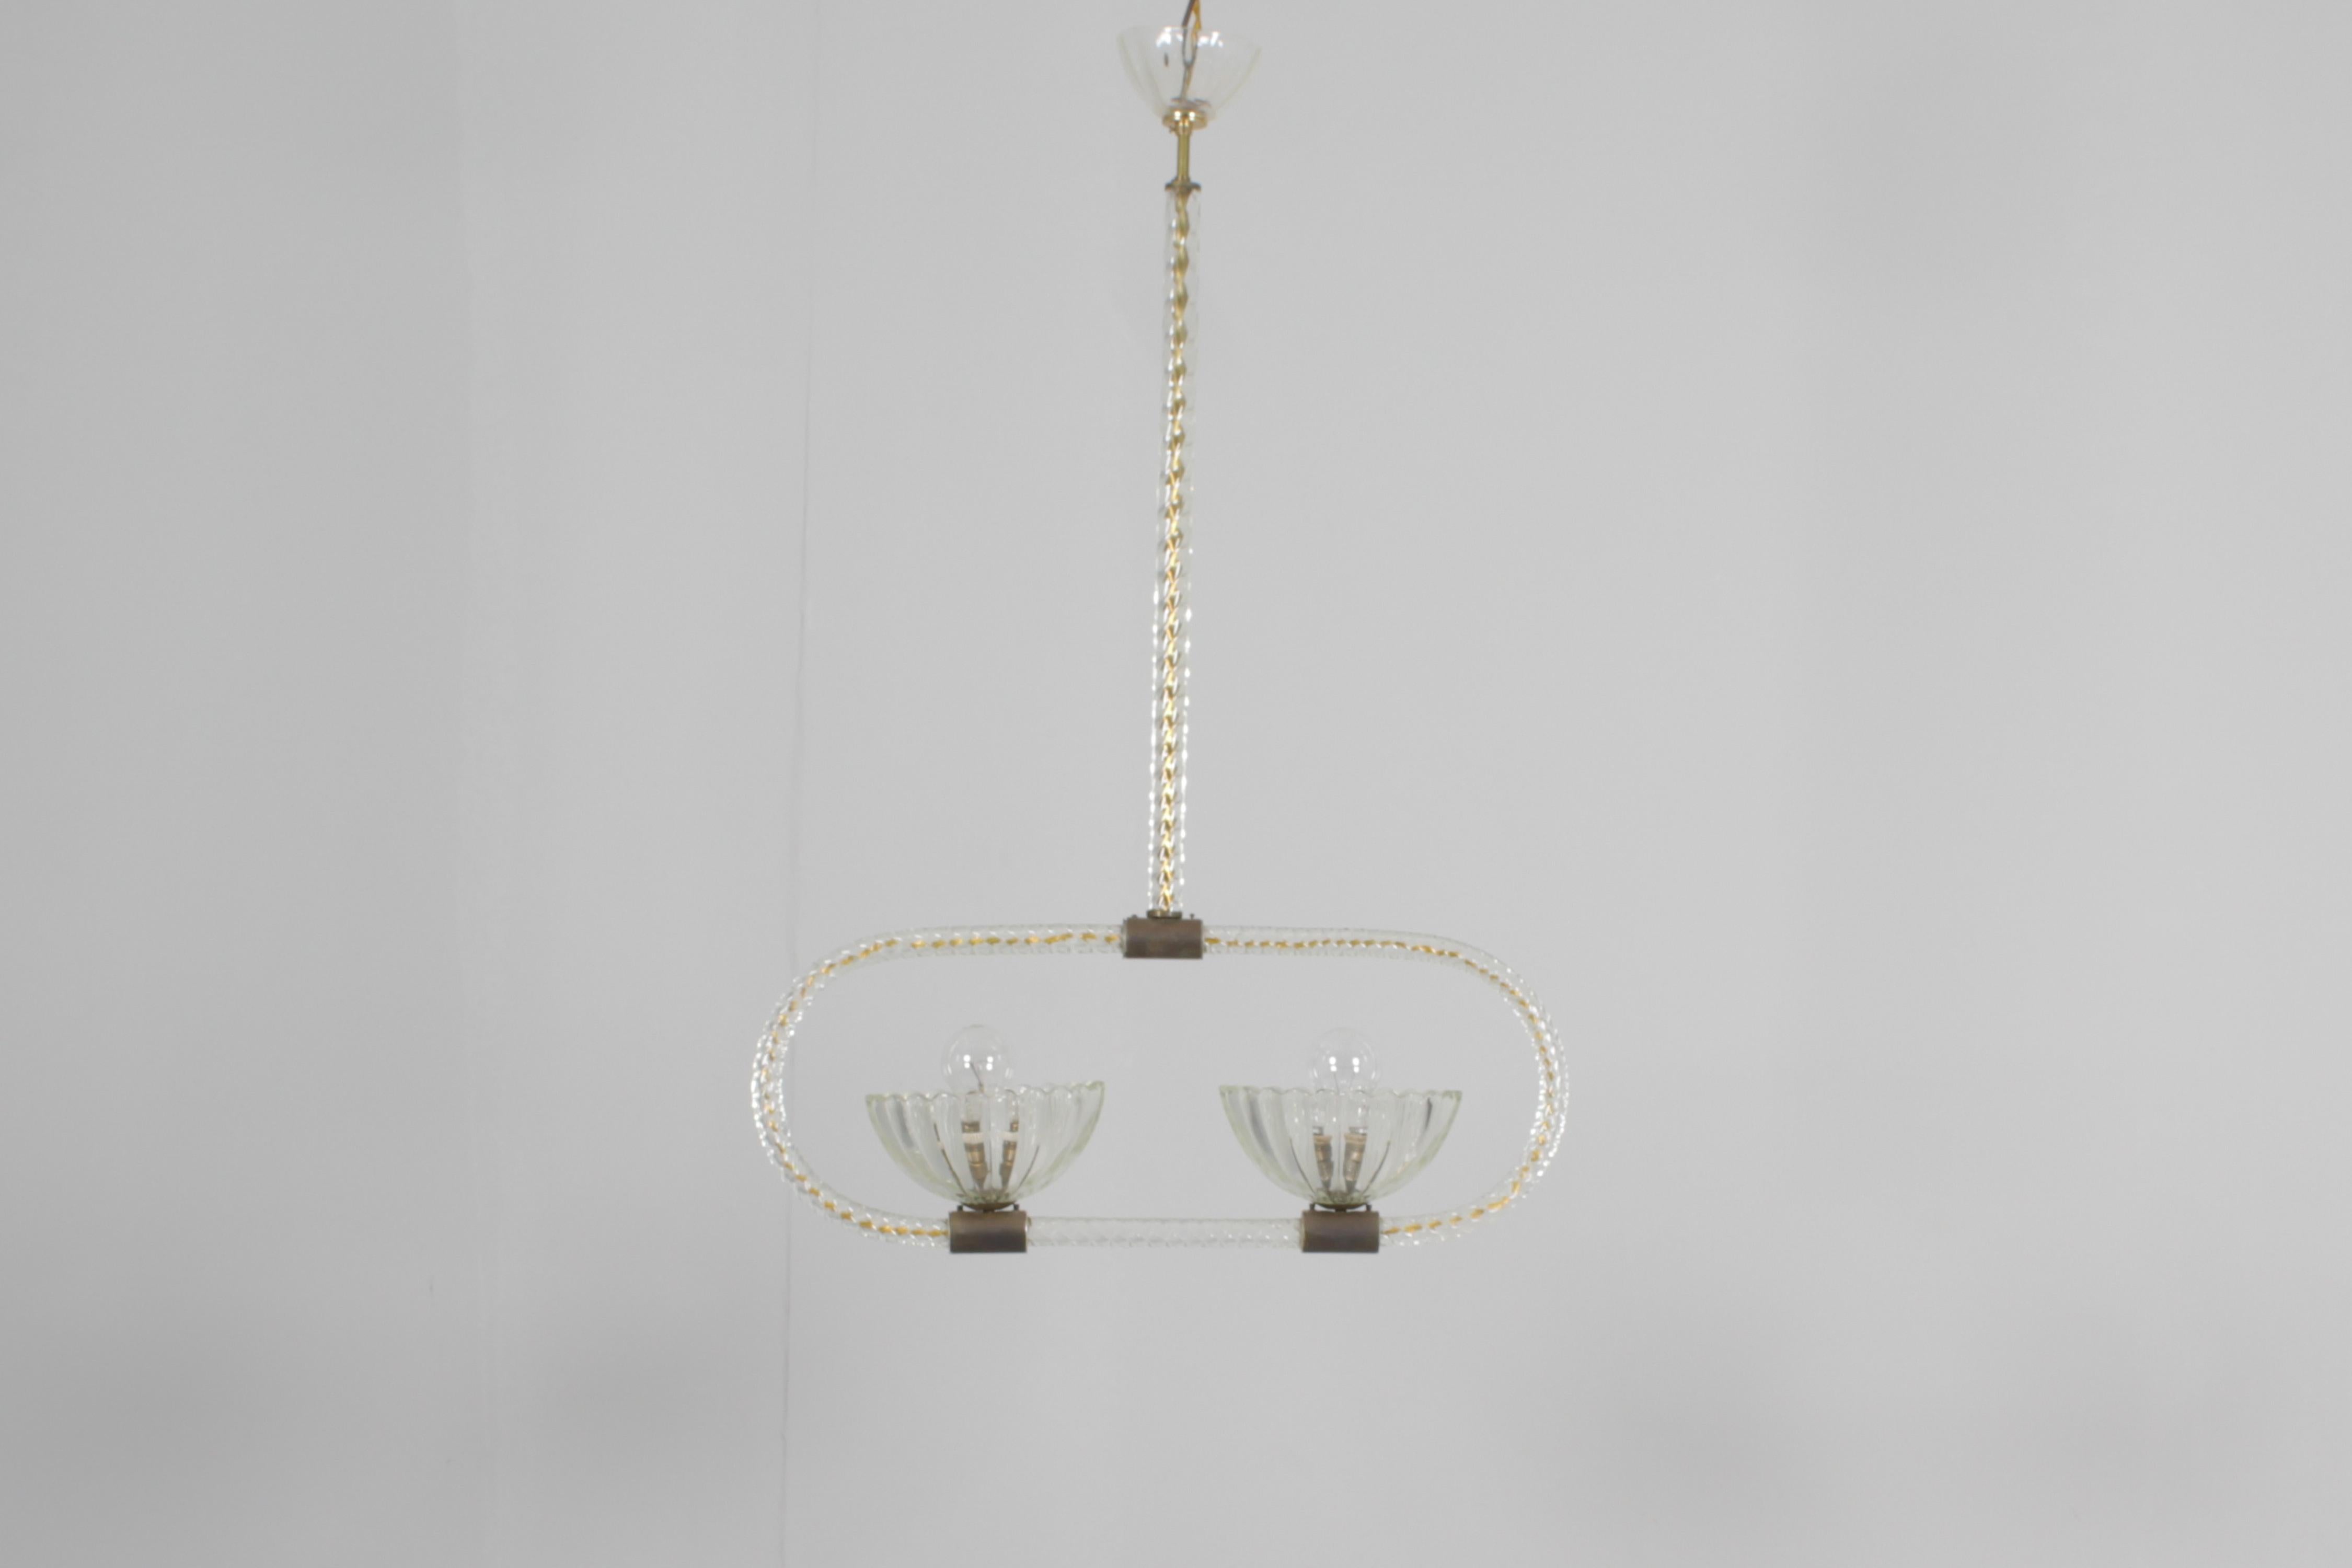 Italian Mid-Century Barovier & Toso Murano Glass and Brass Chandelier 40s Italy For Sale